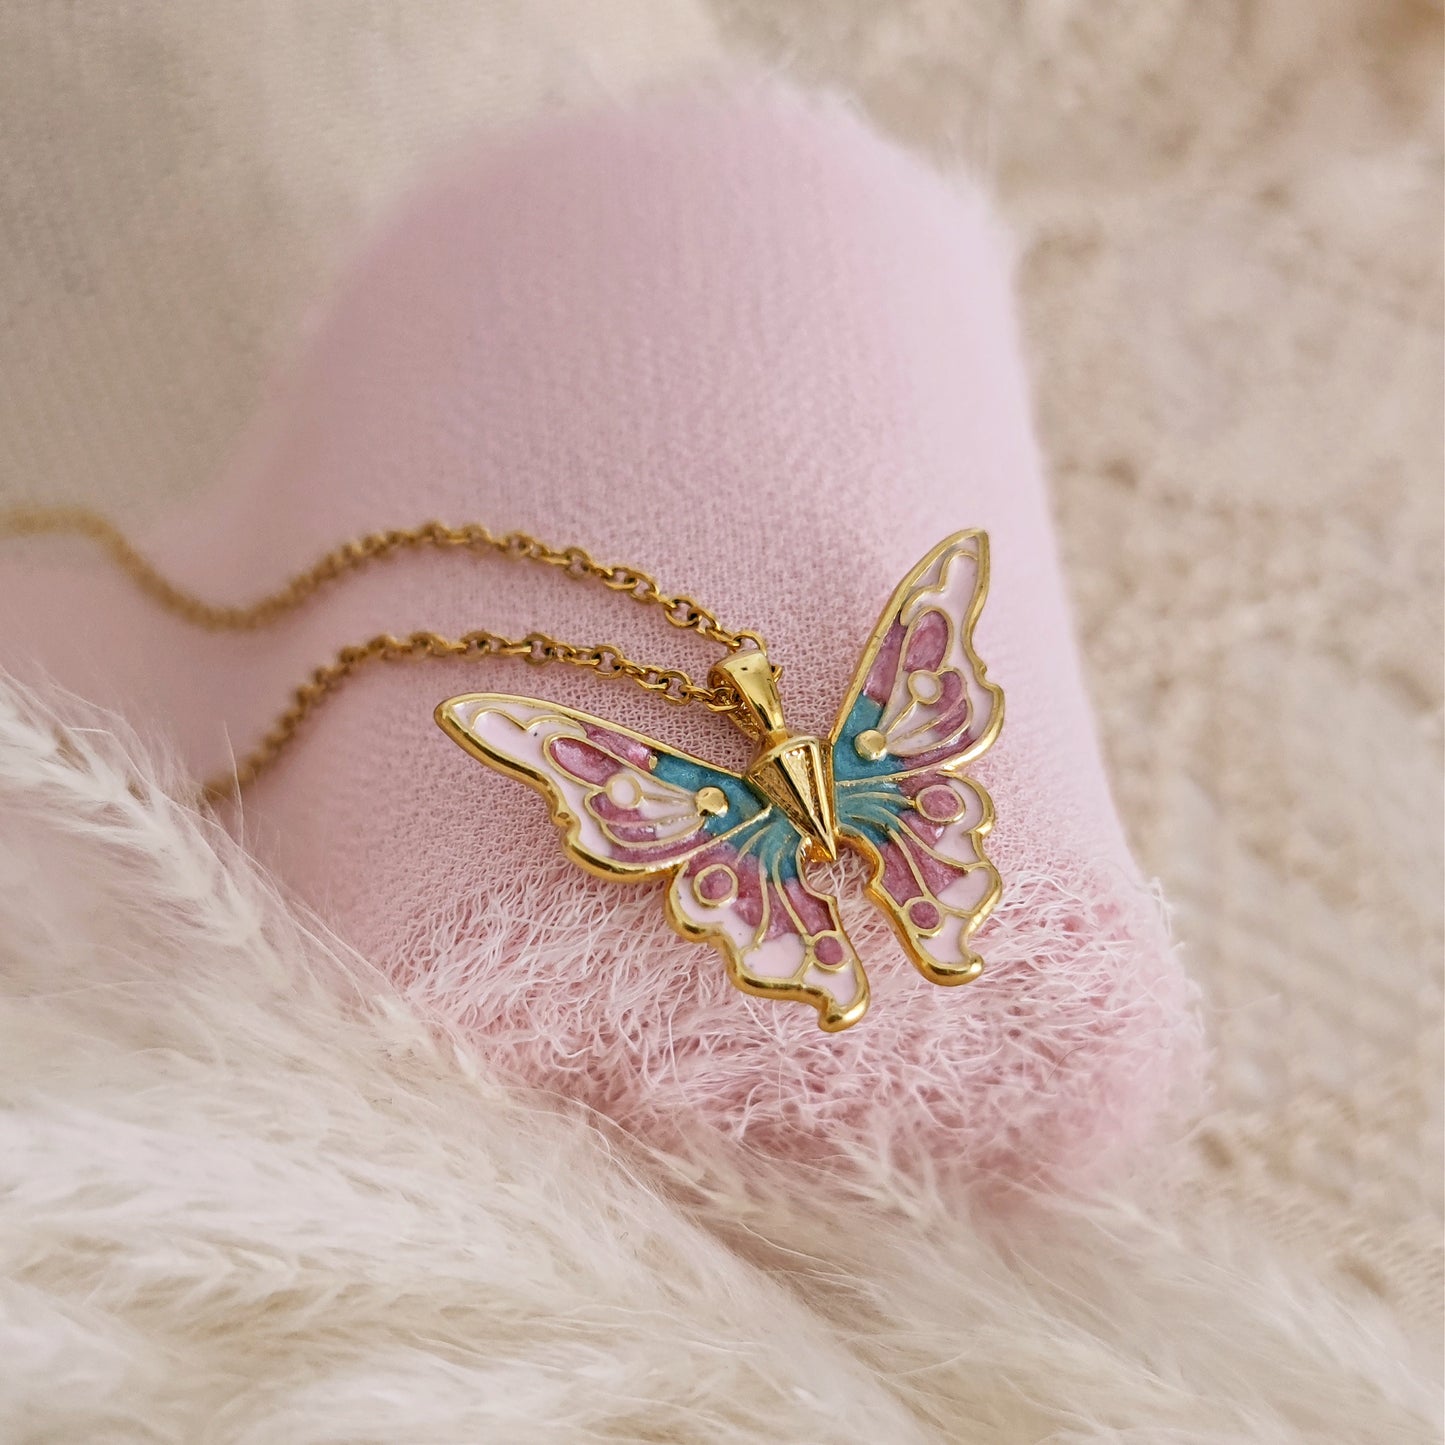 Fairy Pearls Princess Necklace, Mariposa and Pearls Necklace, PrincessCore Butterfly and Pearls Necklace, Coquette Aesthetic, Fairy Princess 